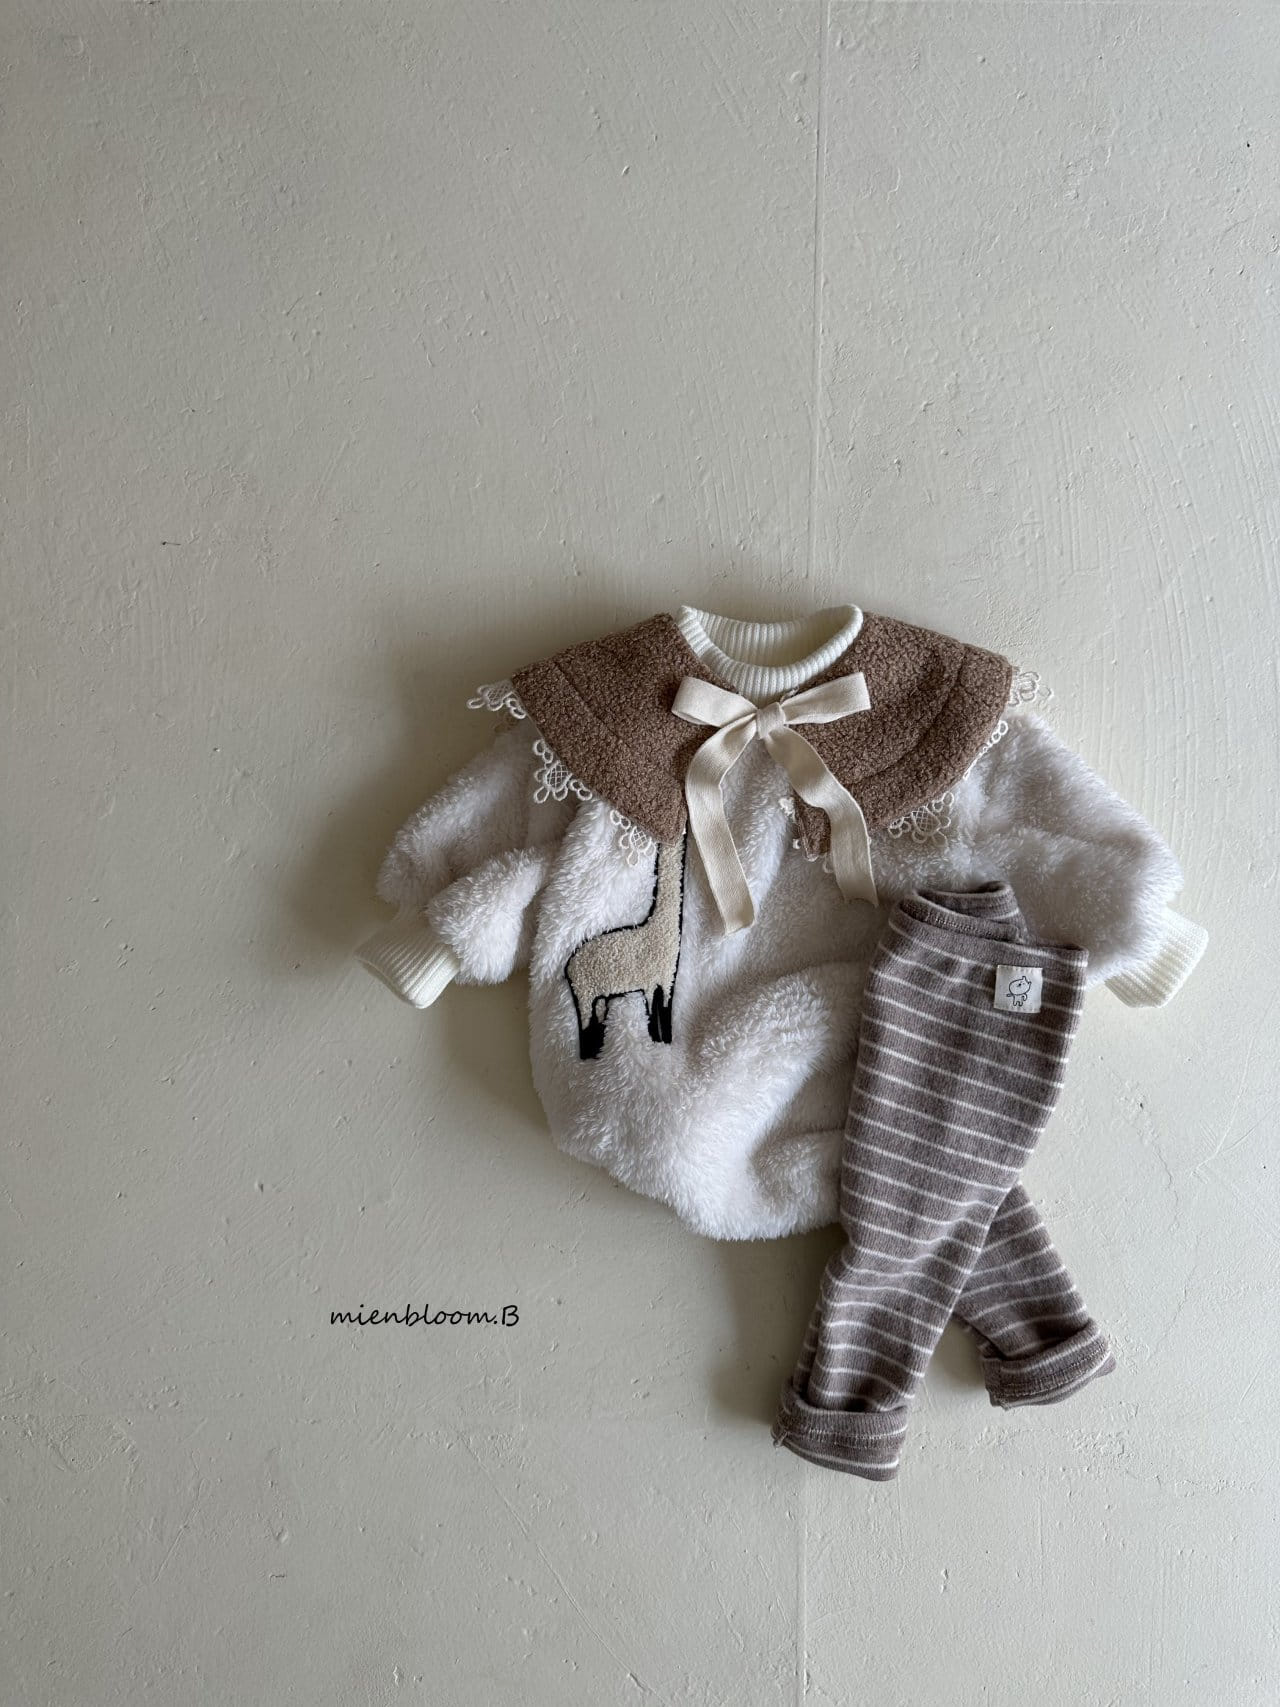 Mienbloom B - Korean Baby Fashion - #babyoutfit - Lama Bboggle Body Suit - 10